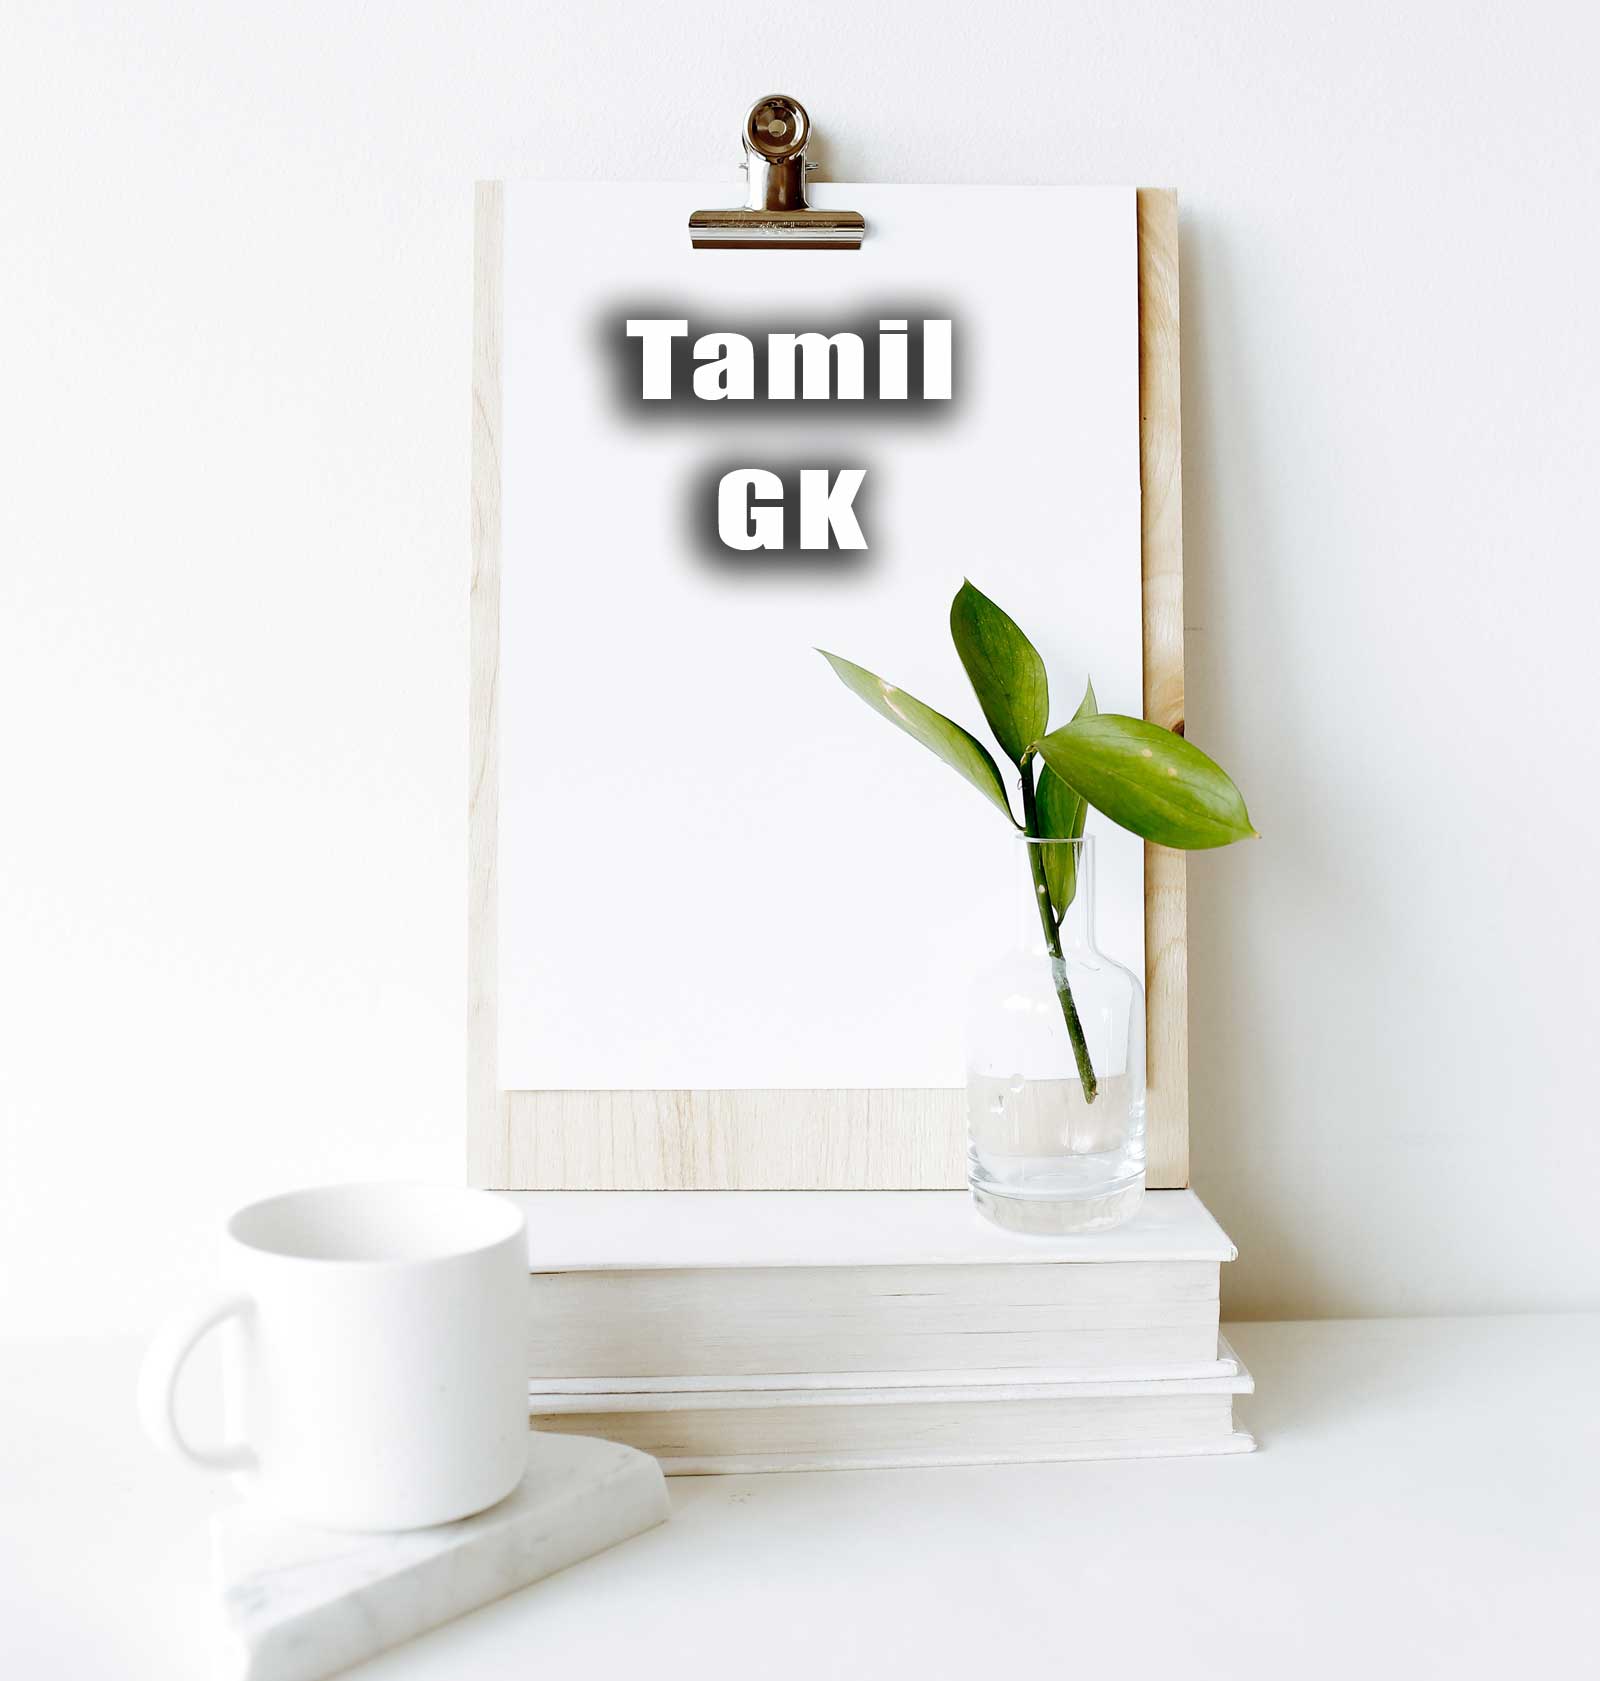 Tamil GK MCQ Questions and Answers